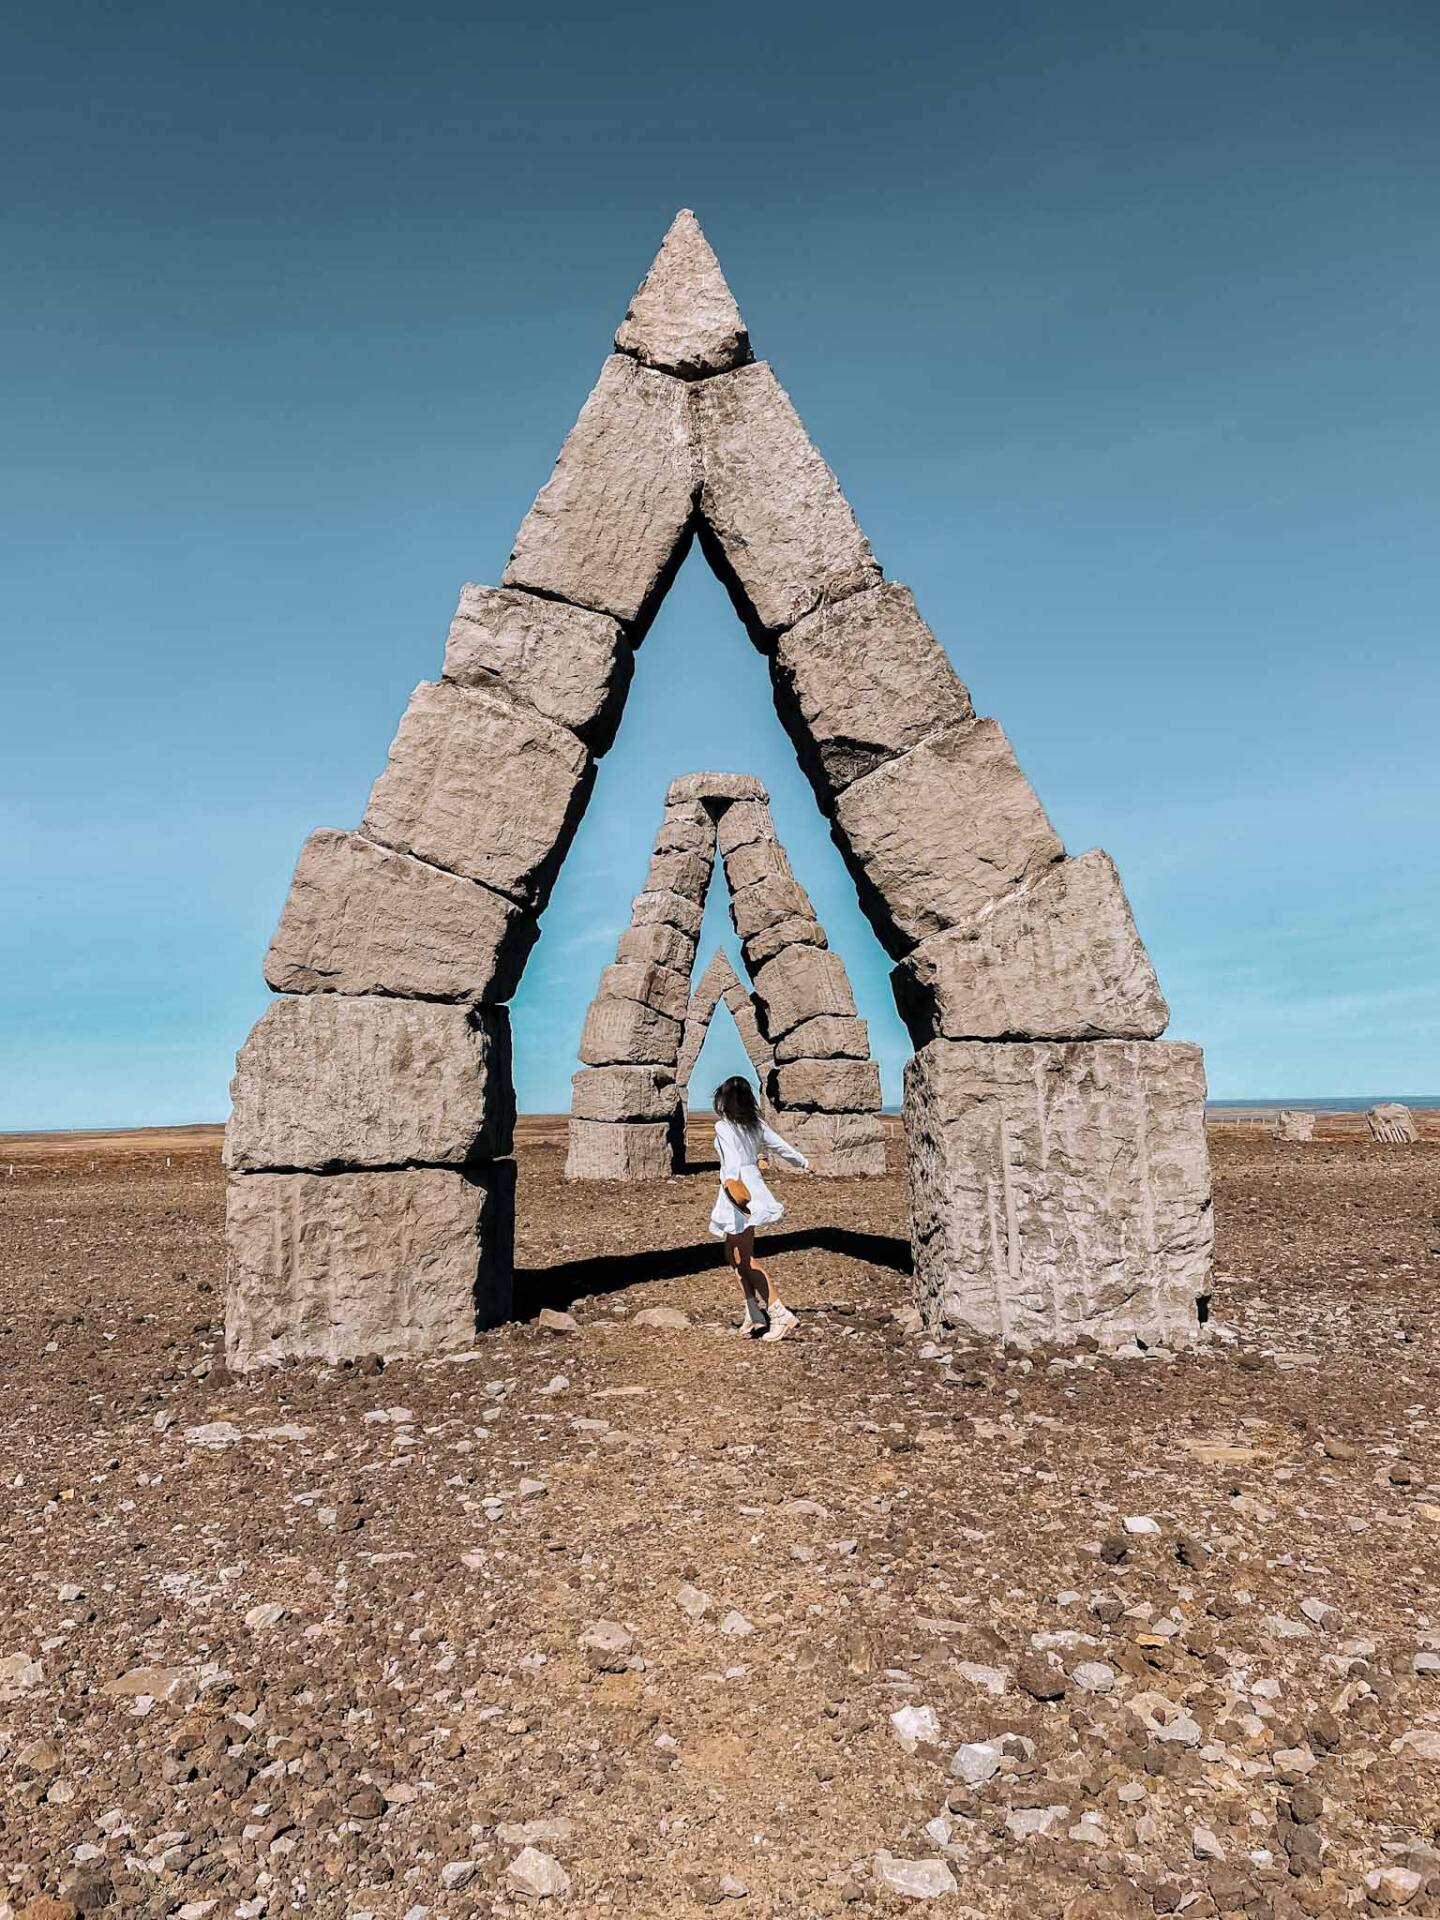 Natural stone arches in Iceland - The Arctic Henge